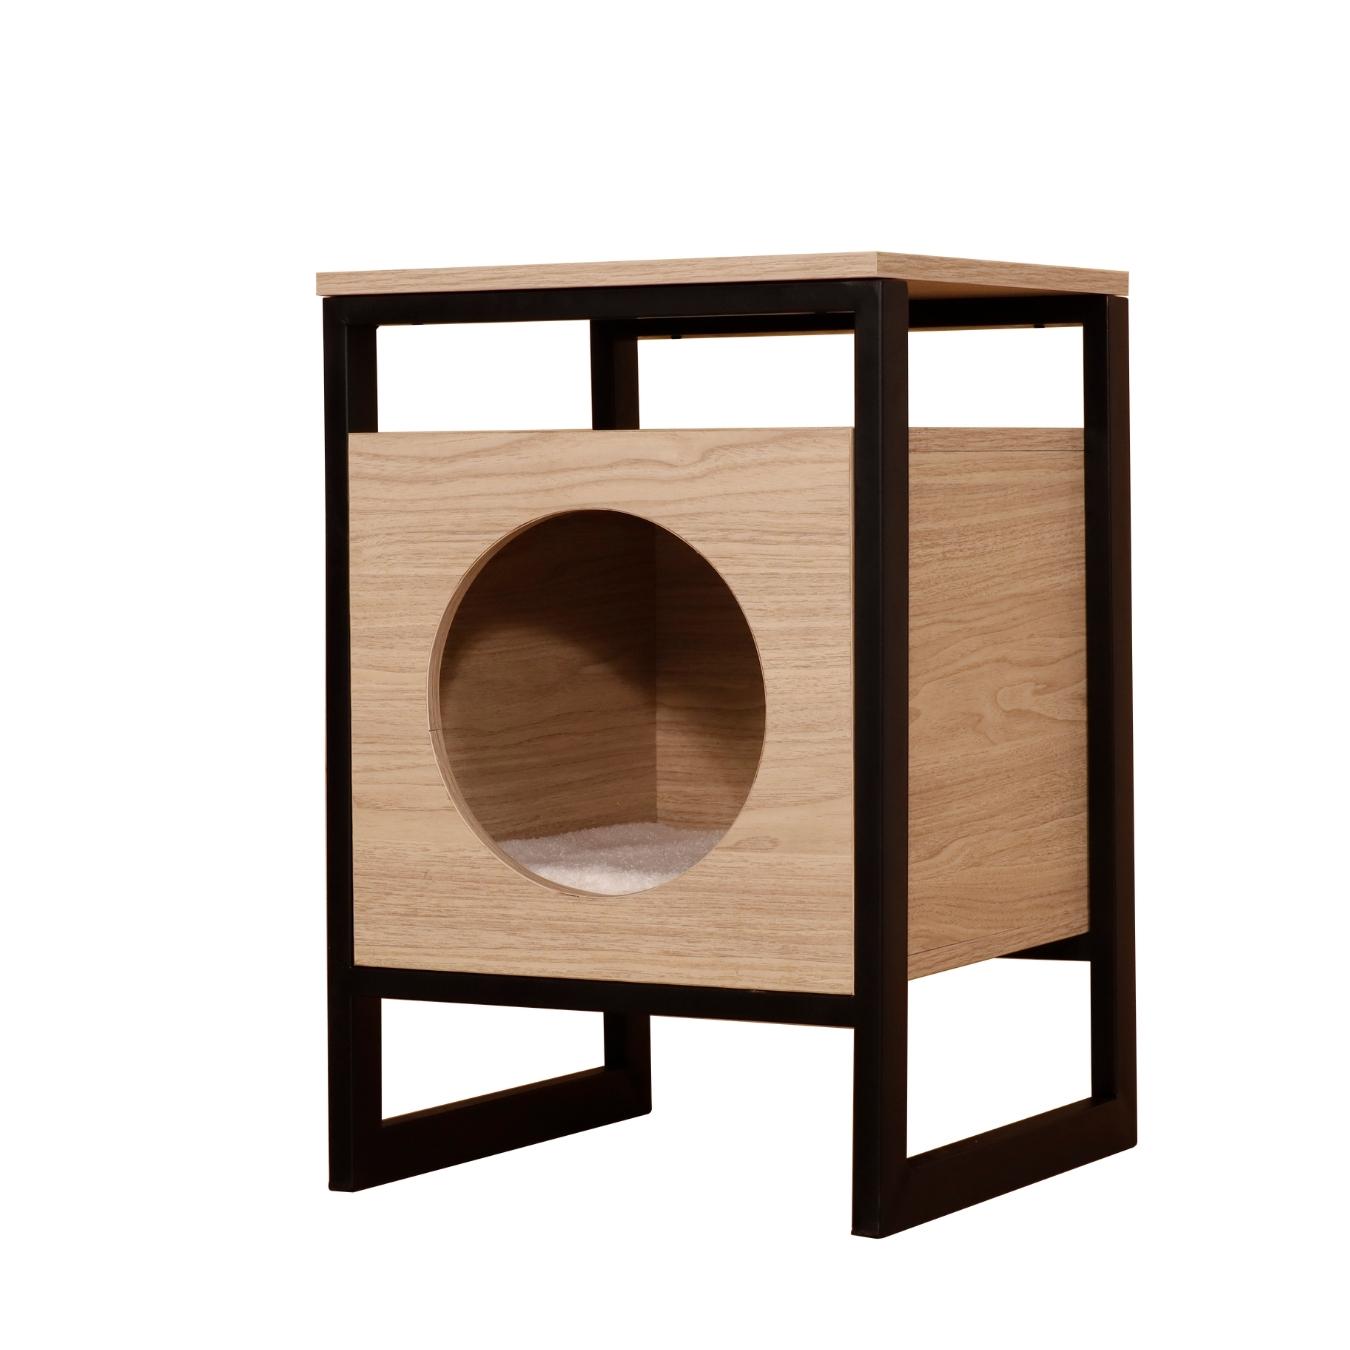 Mr. Chuck - MOJO Cat Box Side Table AF Home